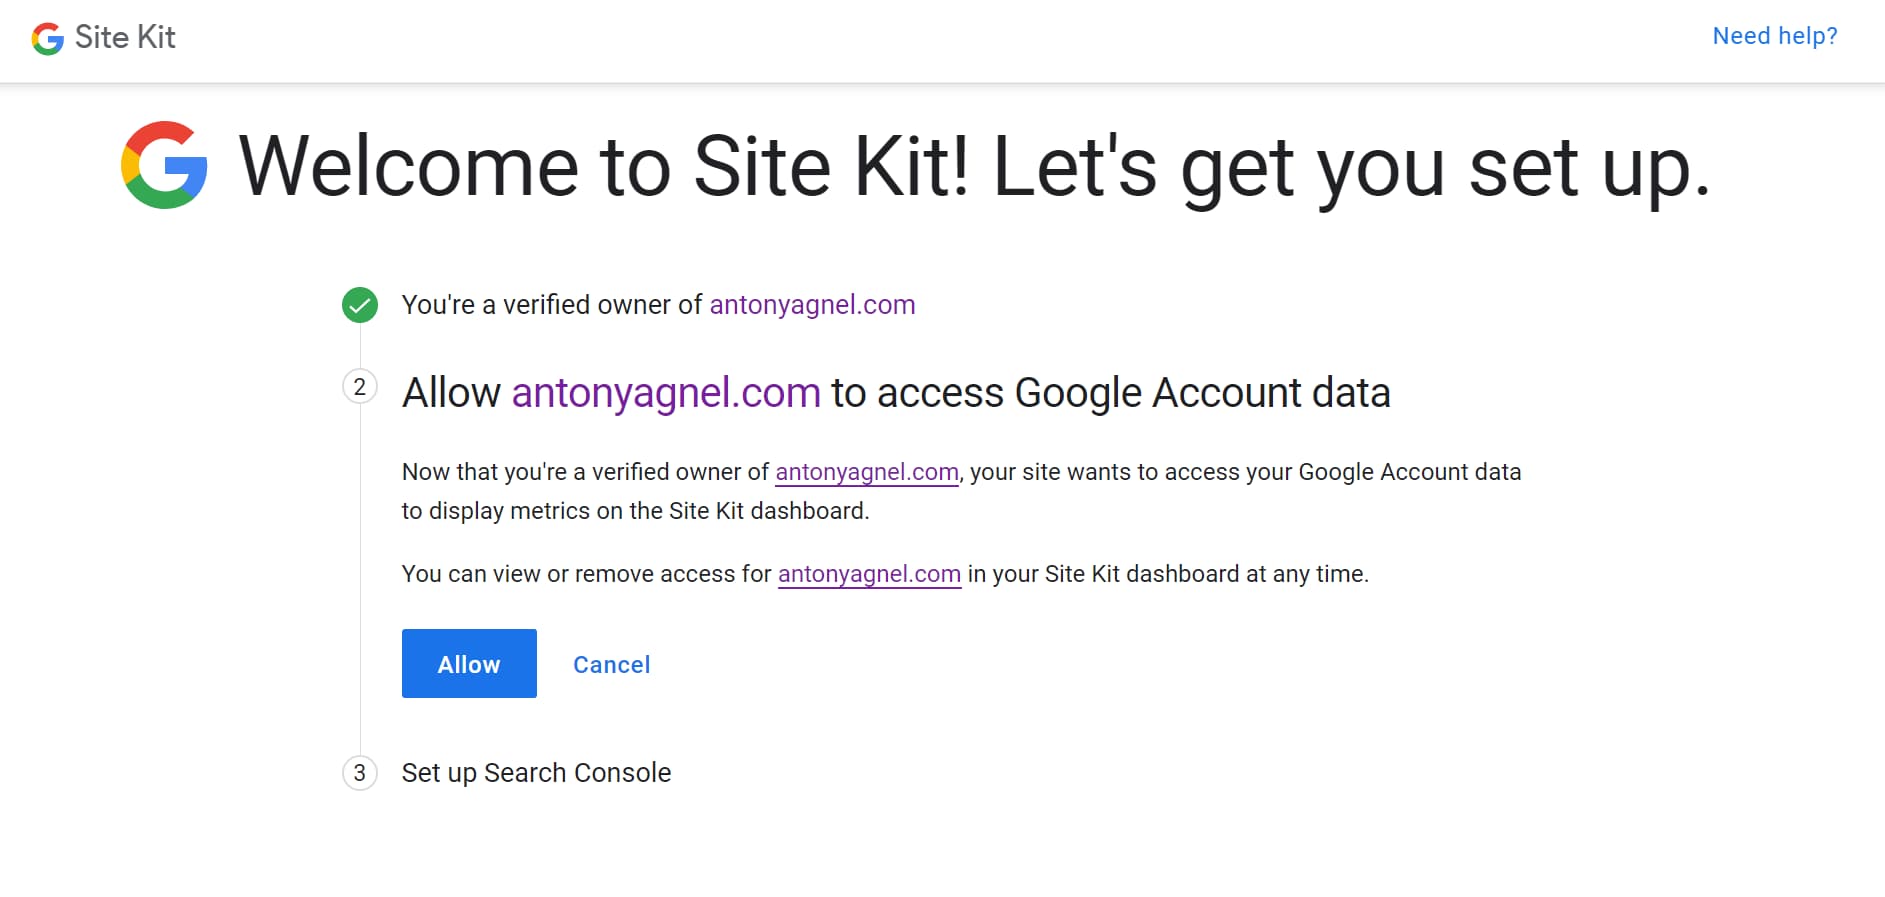 allow site kit to access your google account data